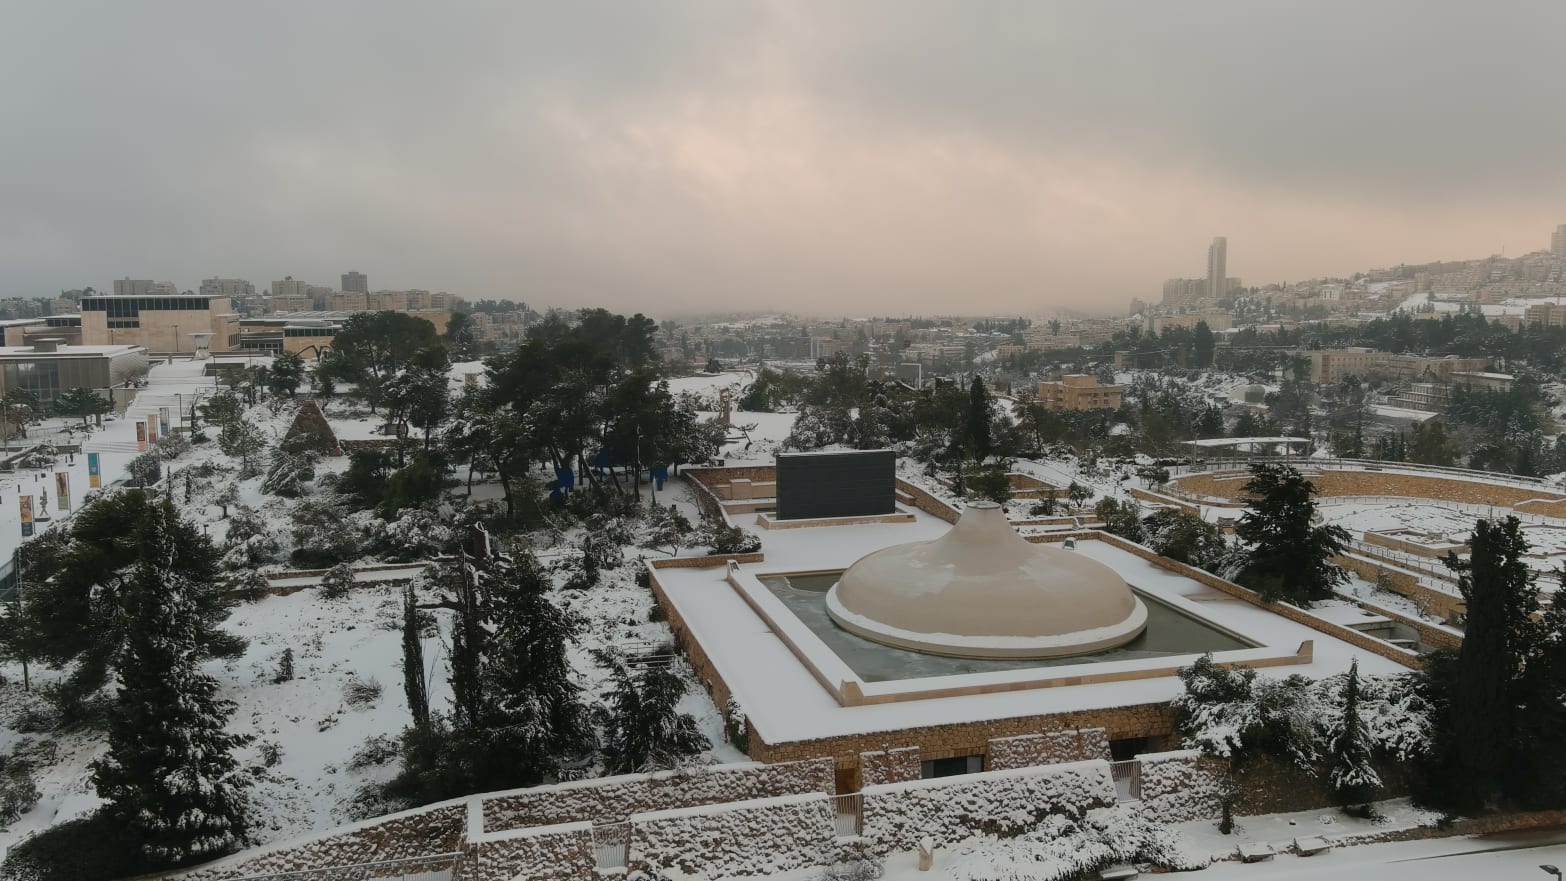 An aerial view shows the Israel Museum in snow-covered Jerusalem, Jan. 27, 2022.